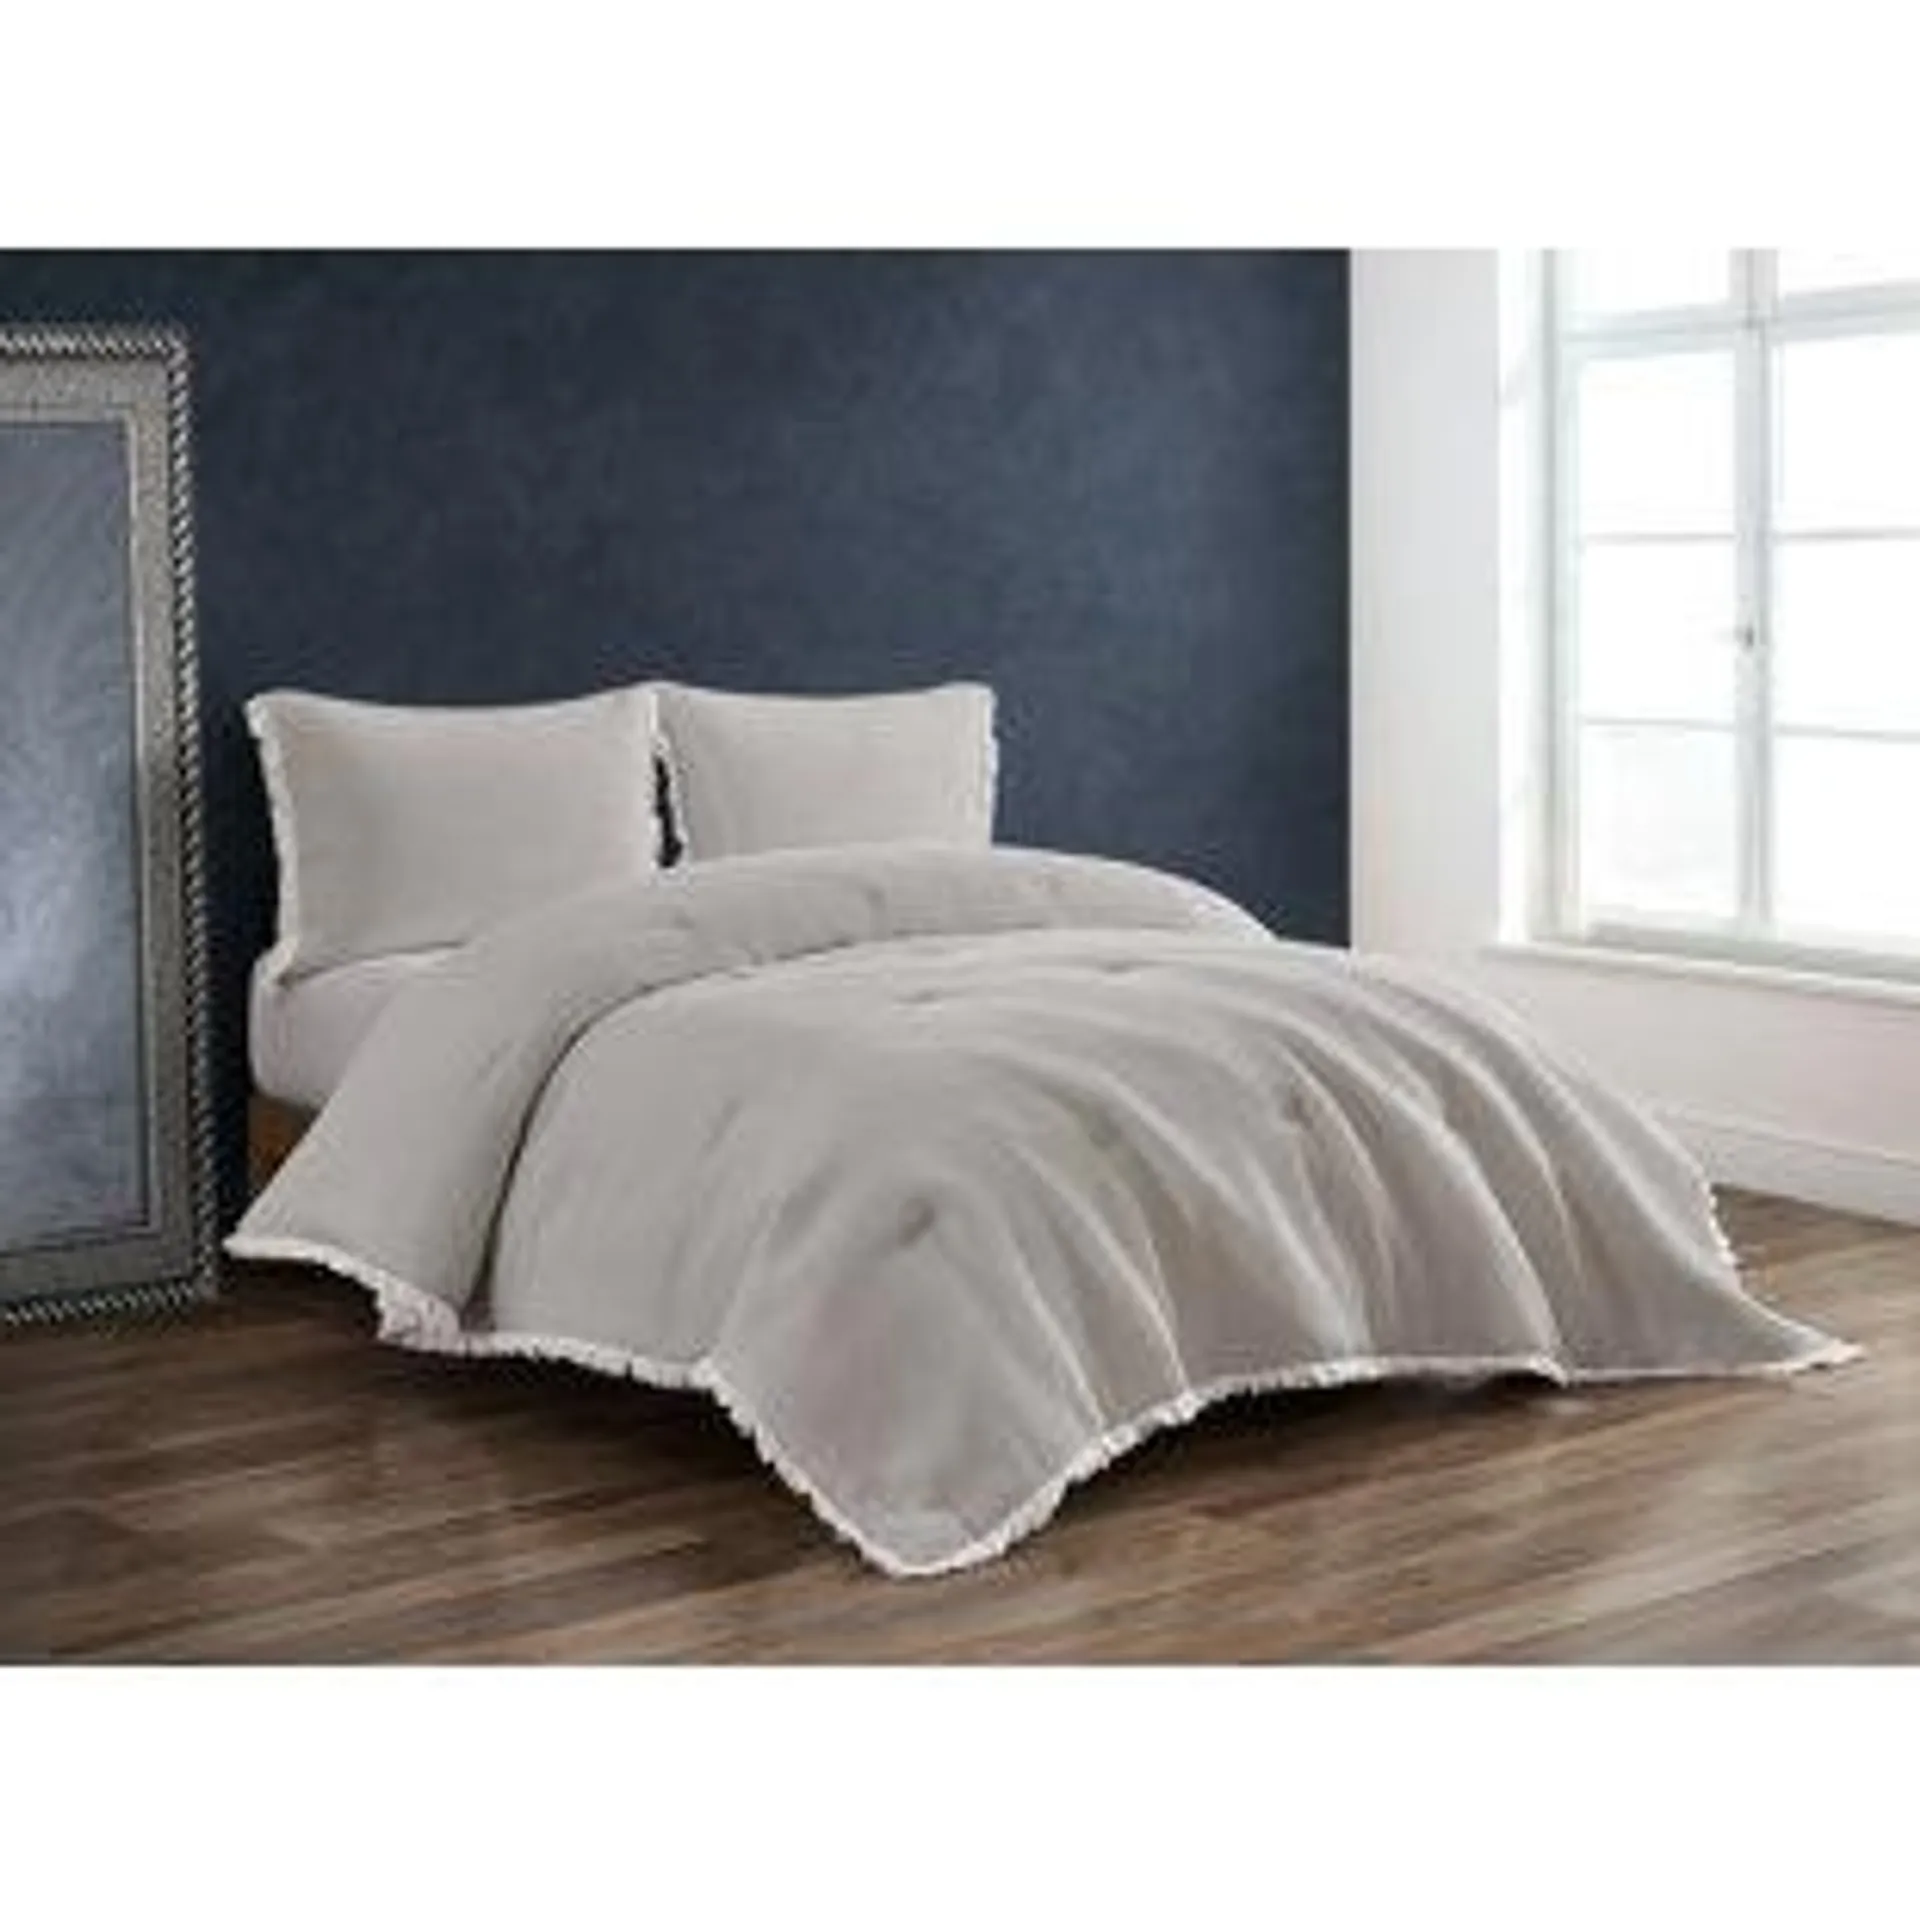 Carstens Cotton Waffle Solid Colour Comforter Set